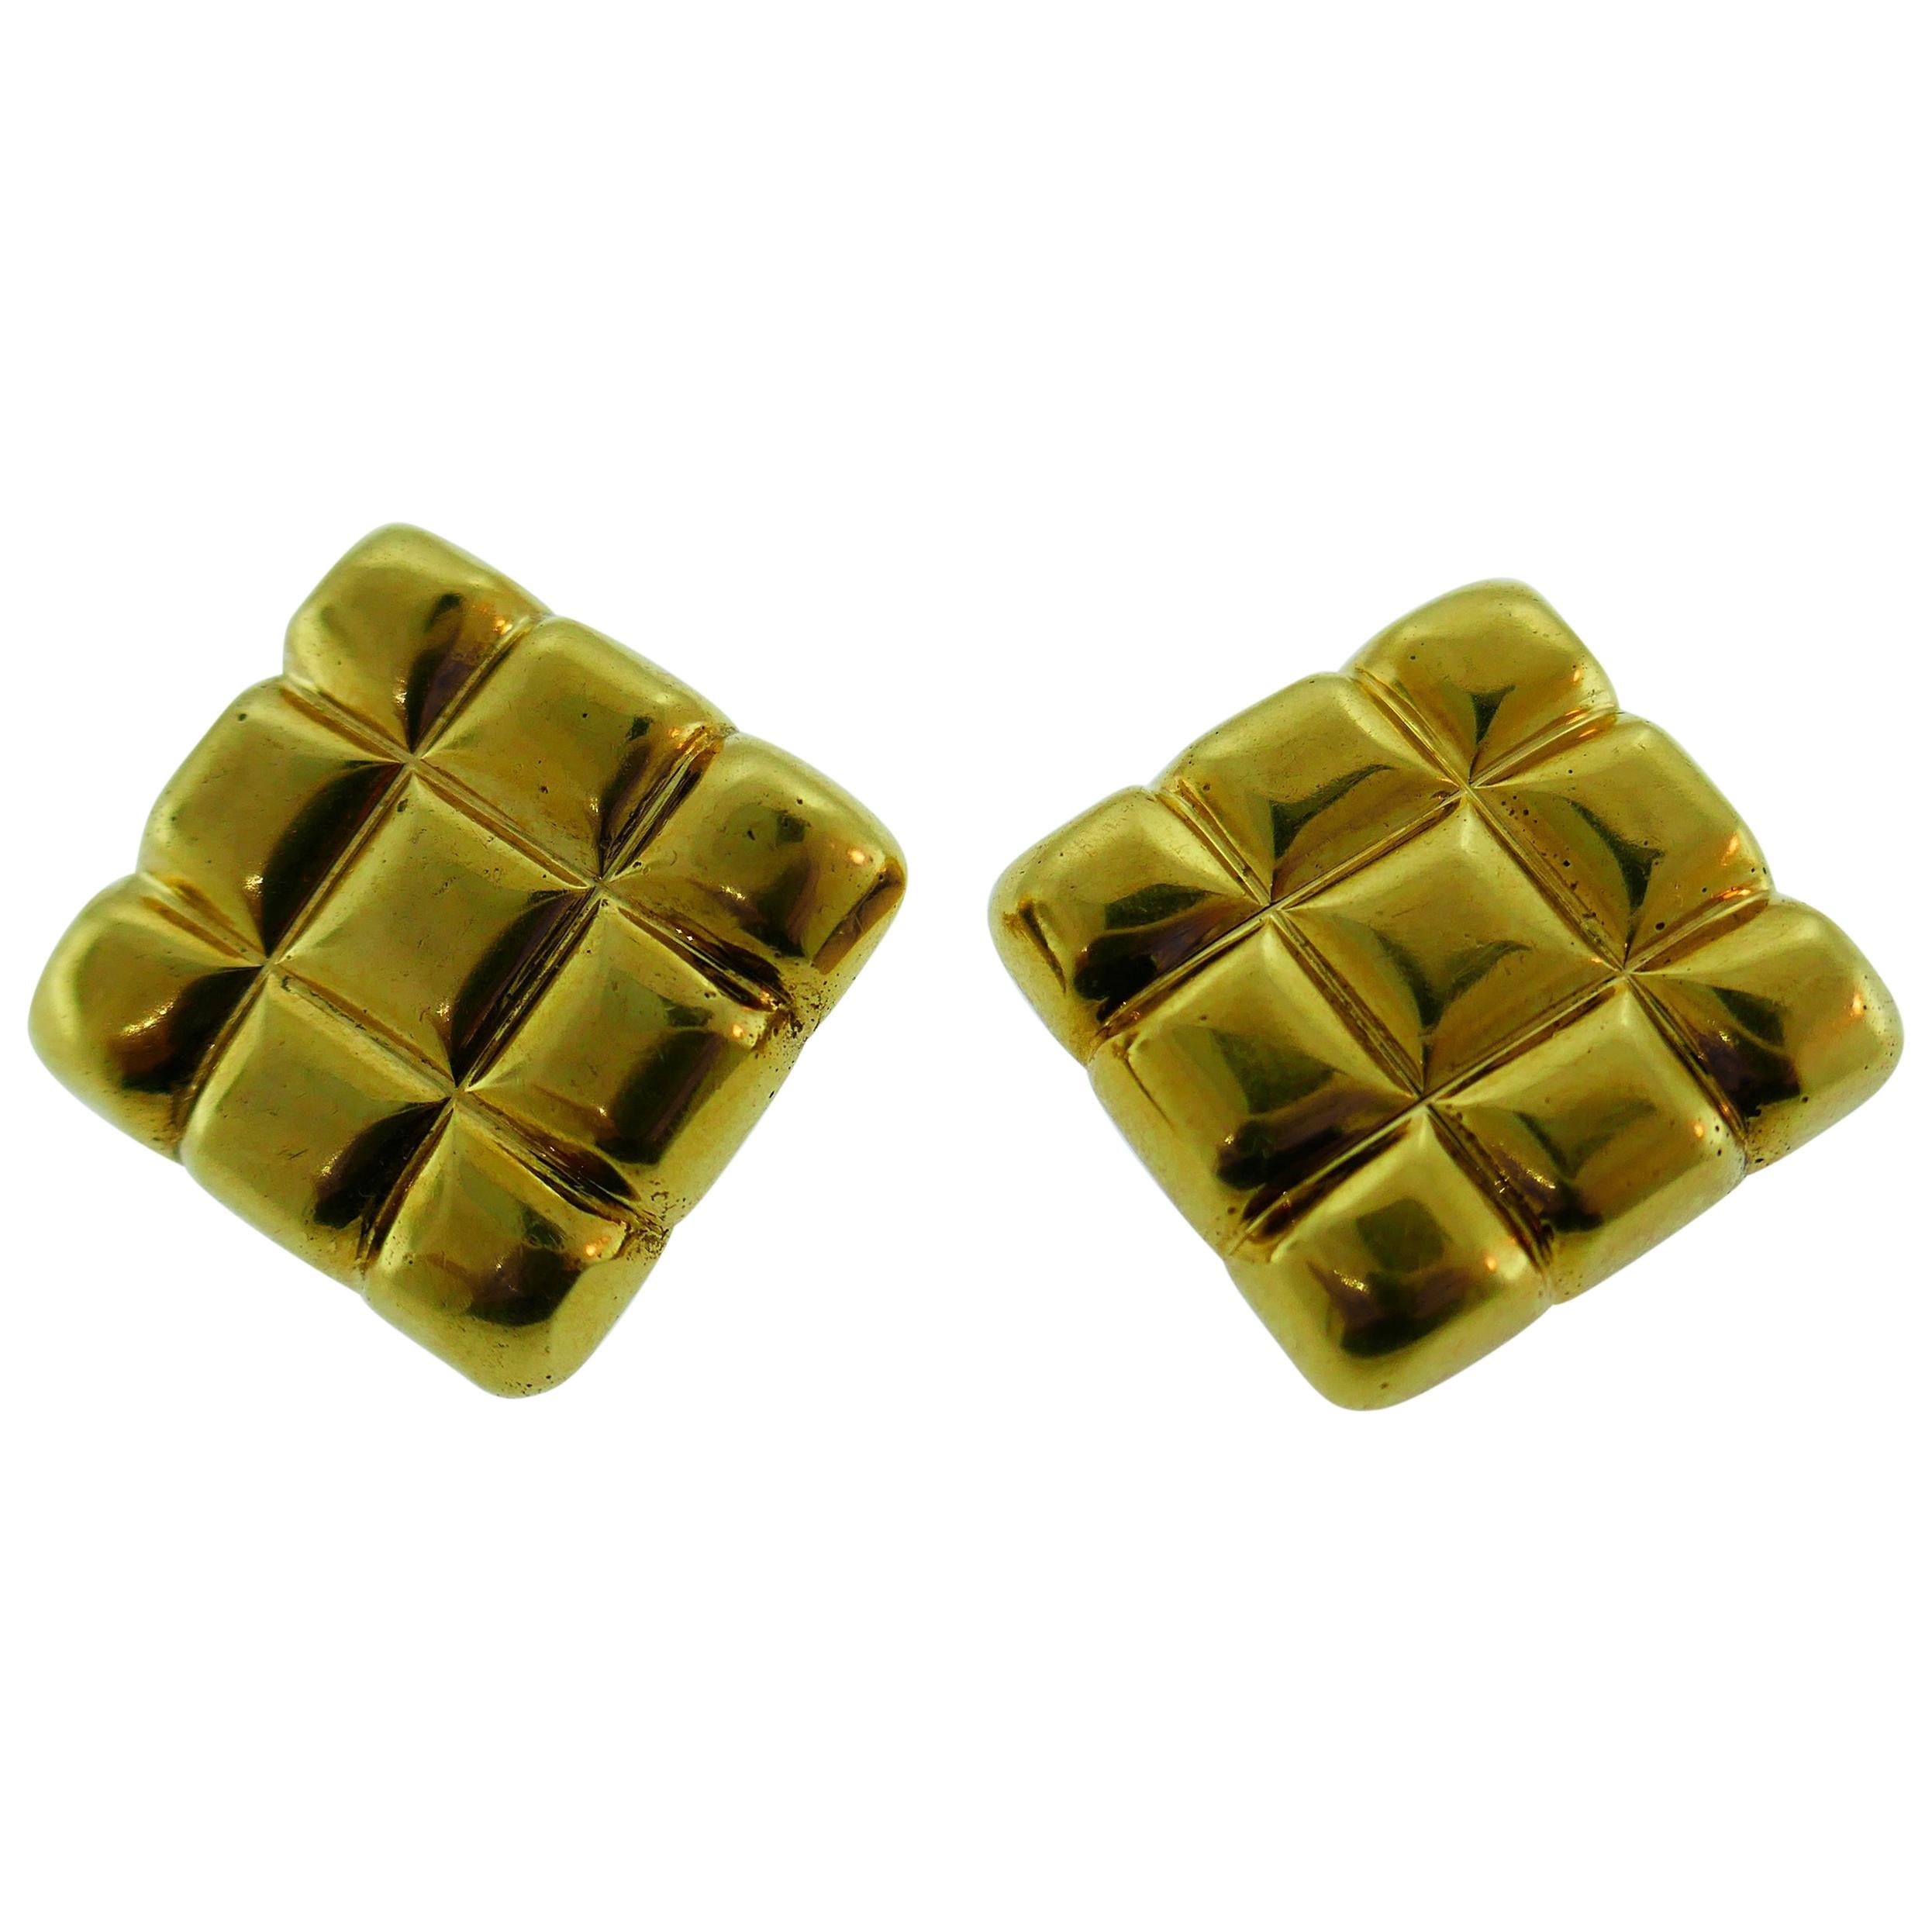 Aldo Cipullo 18 Karat Yellow Gold Quilted Clip-On Earrings Vintage, circa 1970s